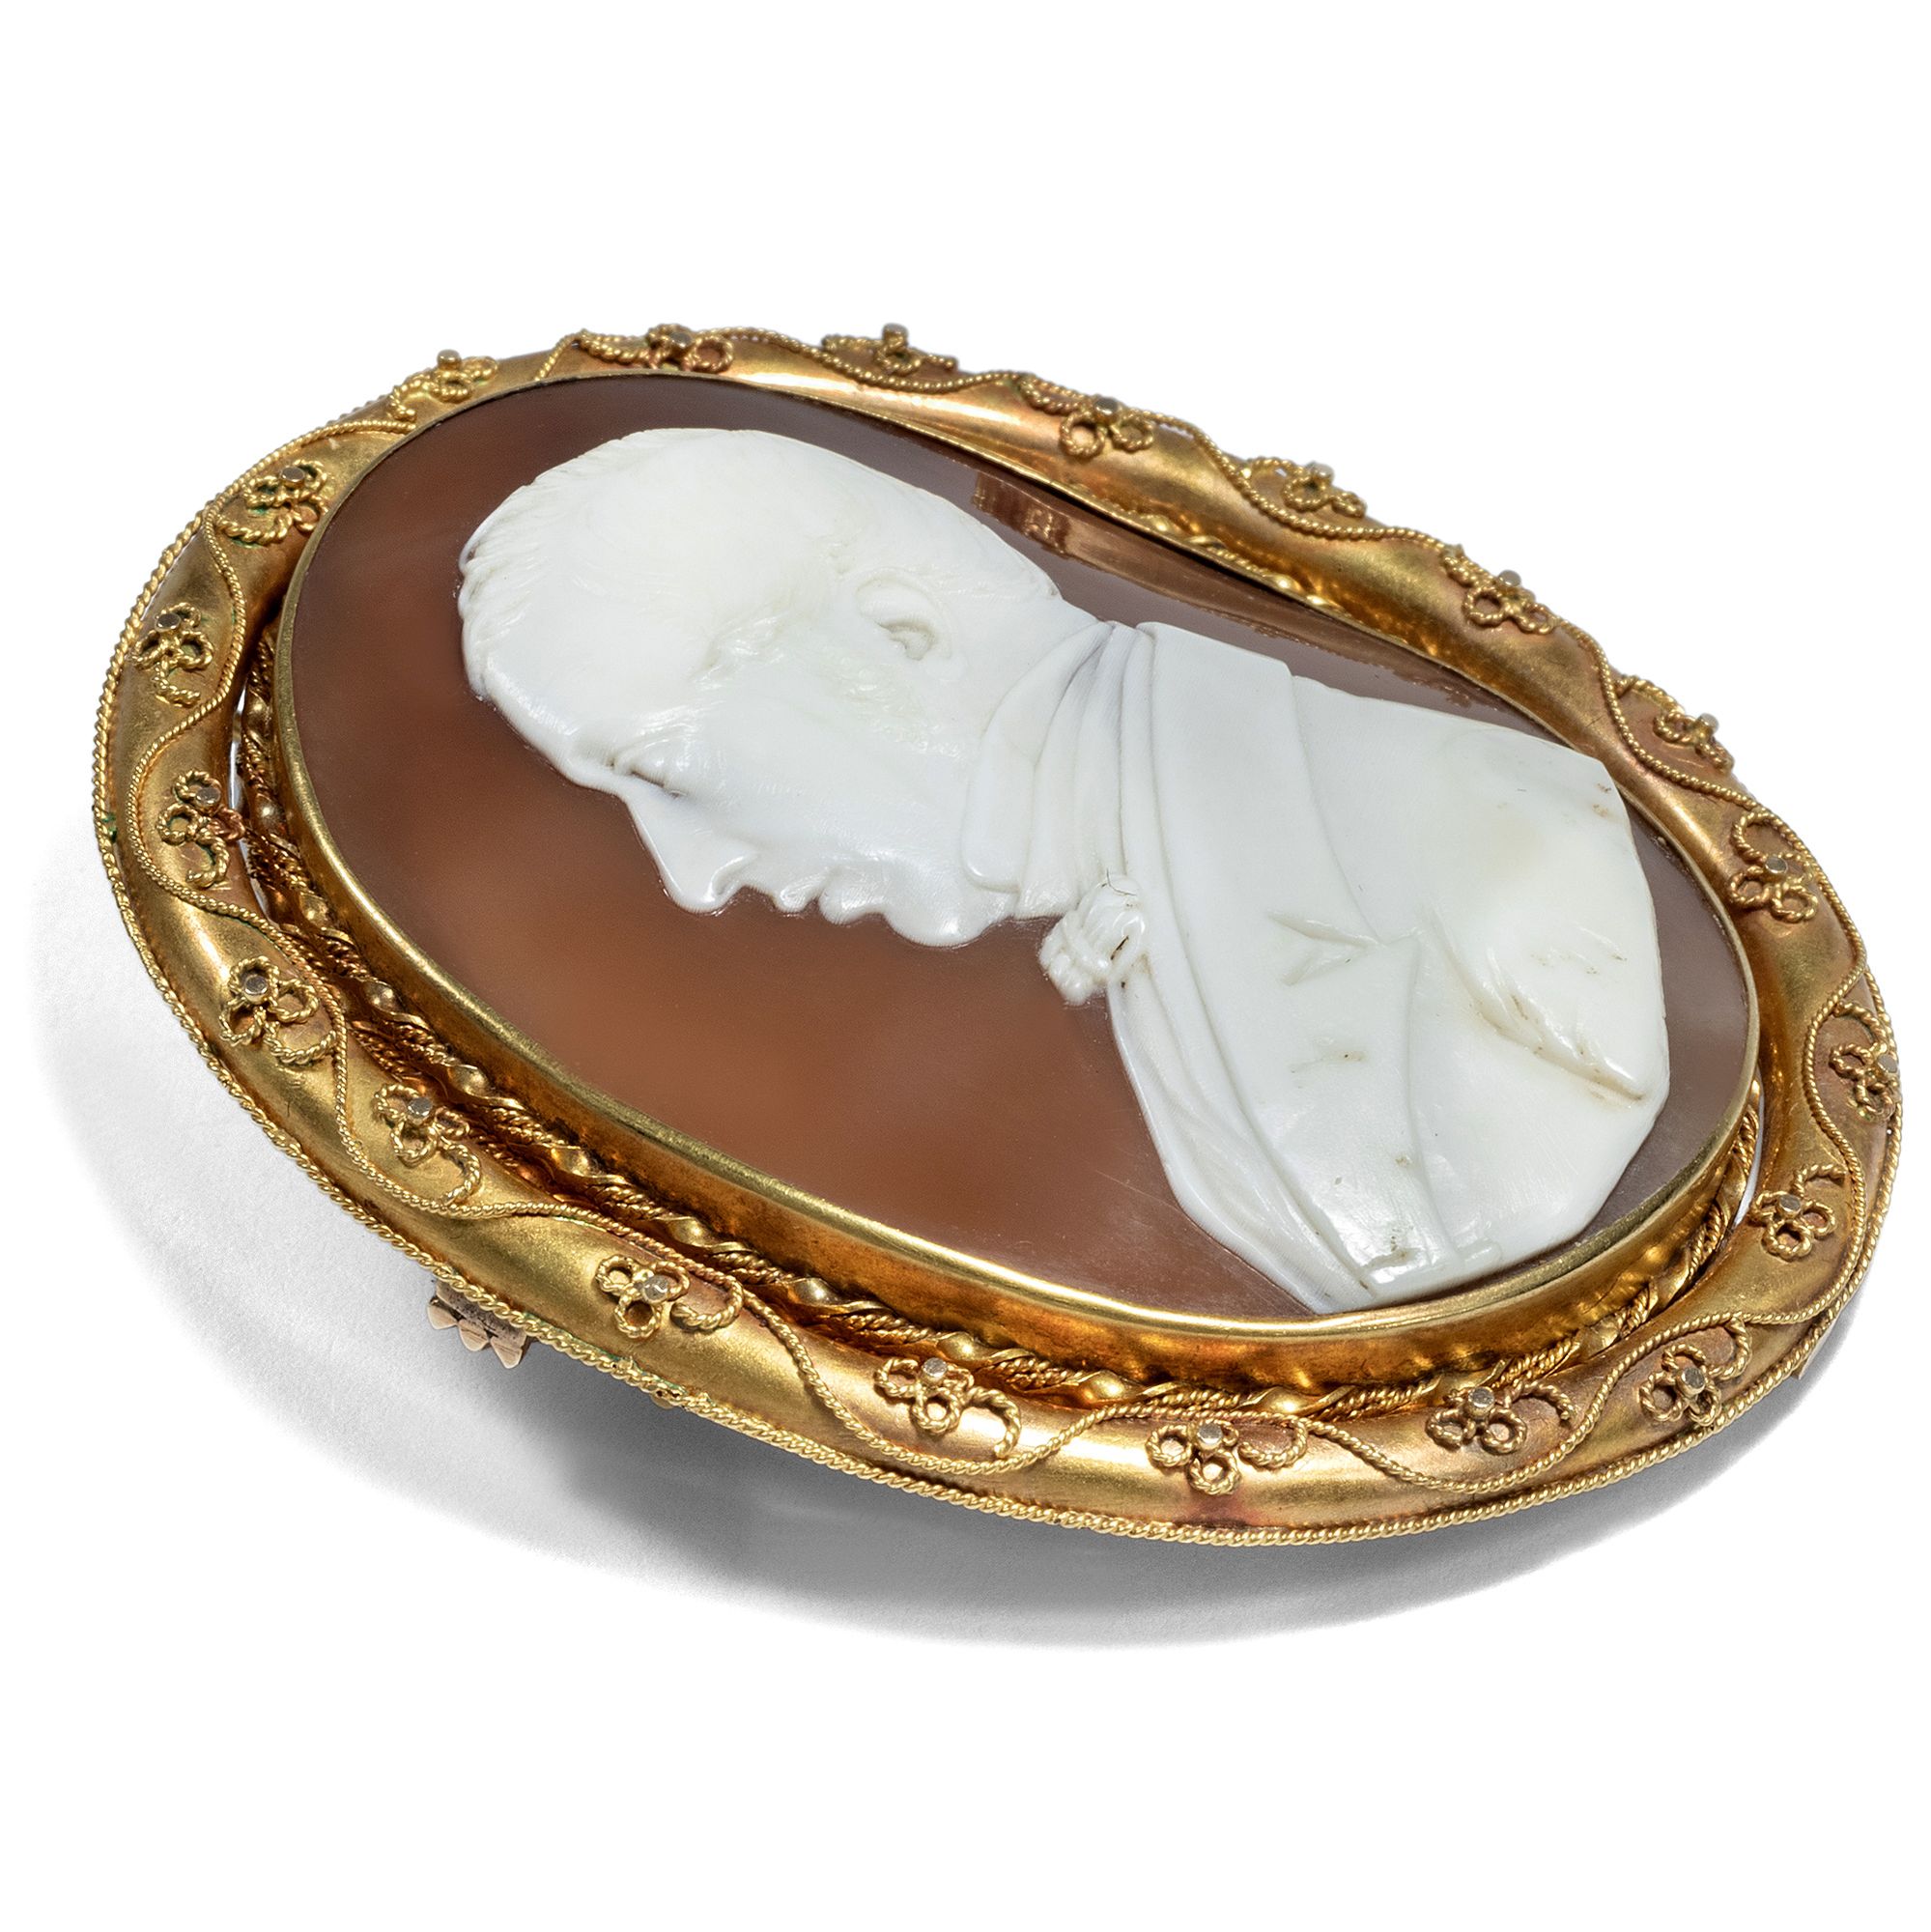 Large Antique Shell Cameo With Locket in Gold, Around 1870